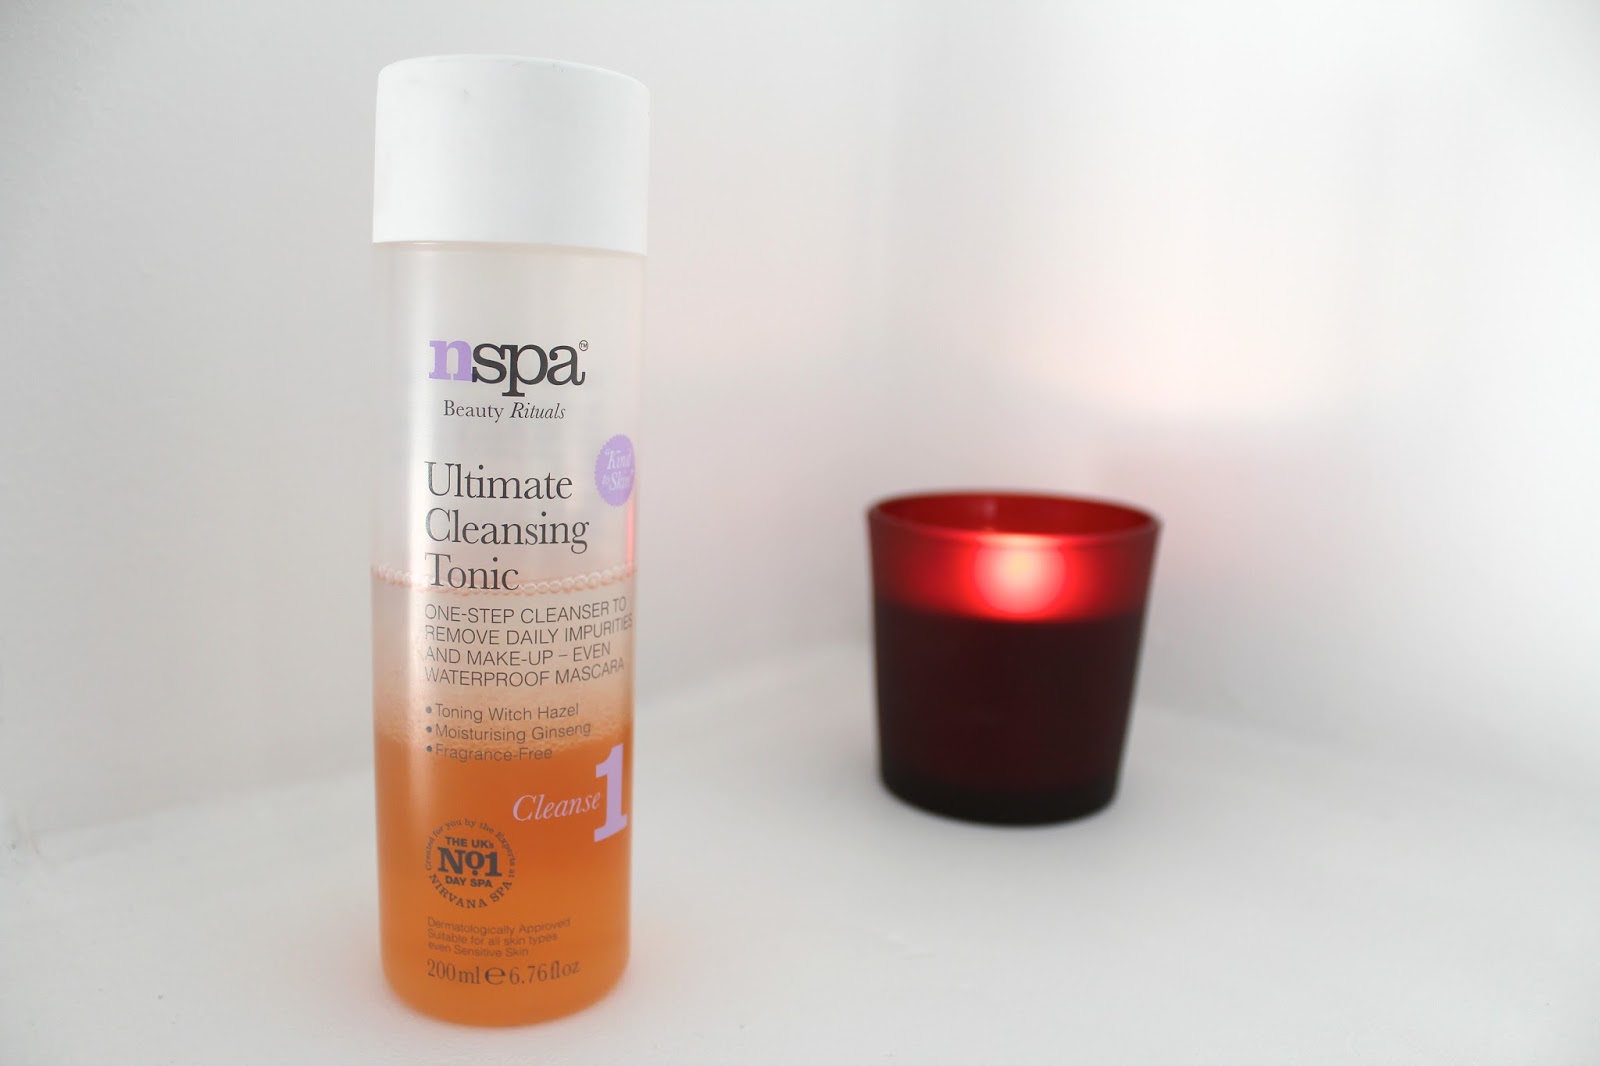 bblogger bbloggers beauty skincare skin nspa ultimate cleansing tonic cleanser makeup remover review recommendation recommend blog blogger kirstie pickering